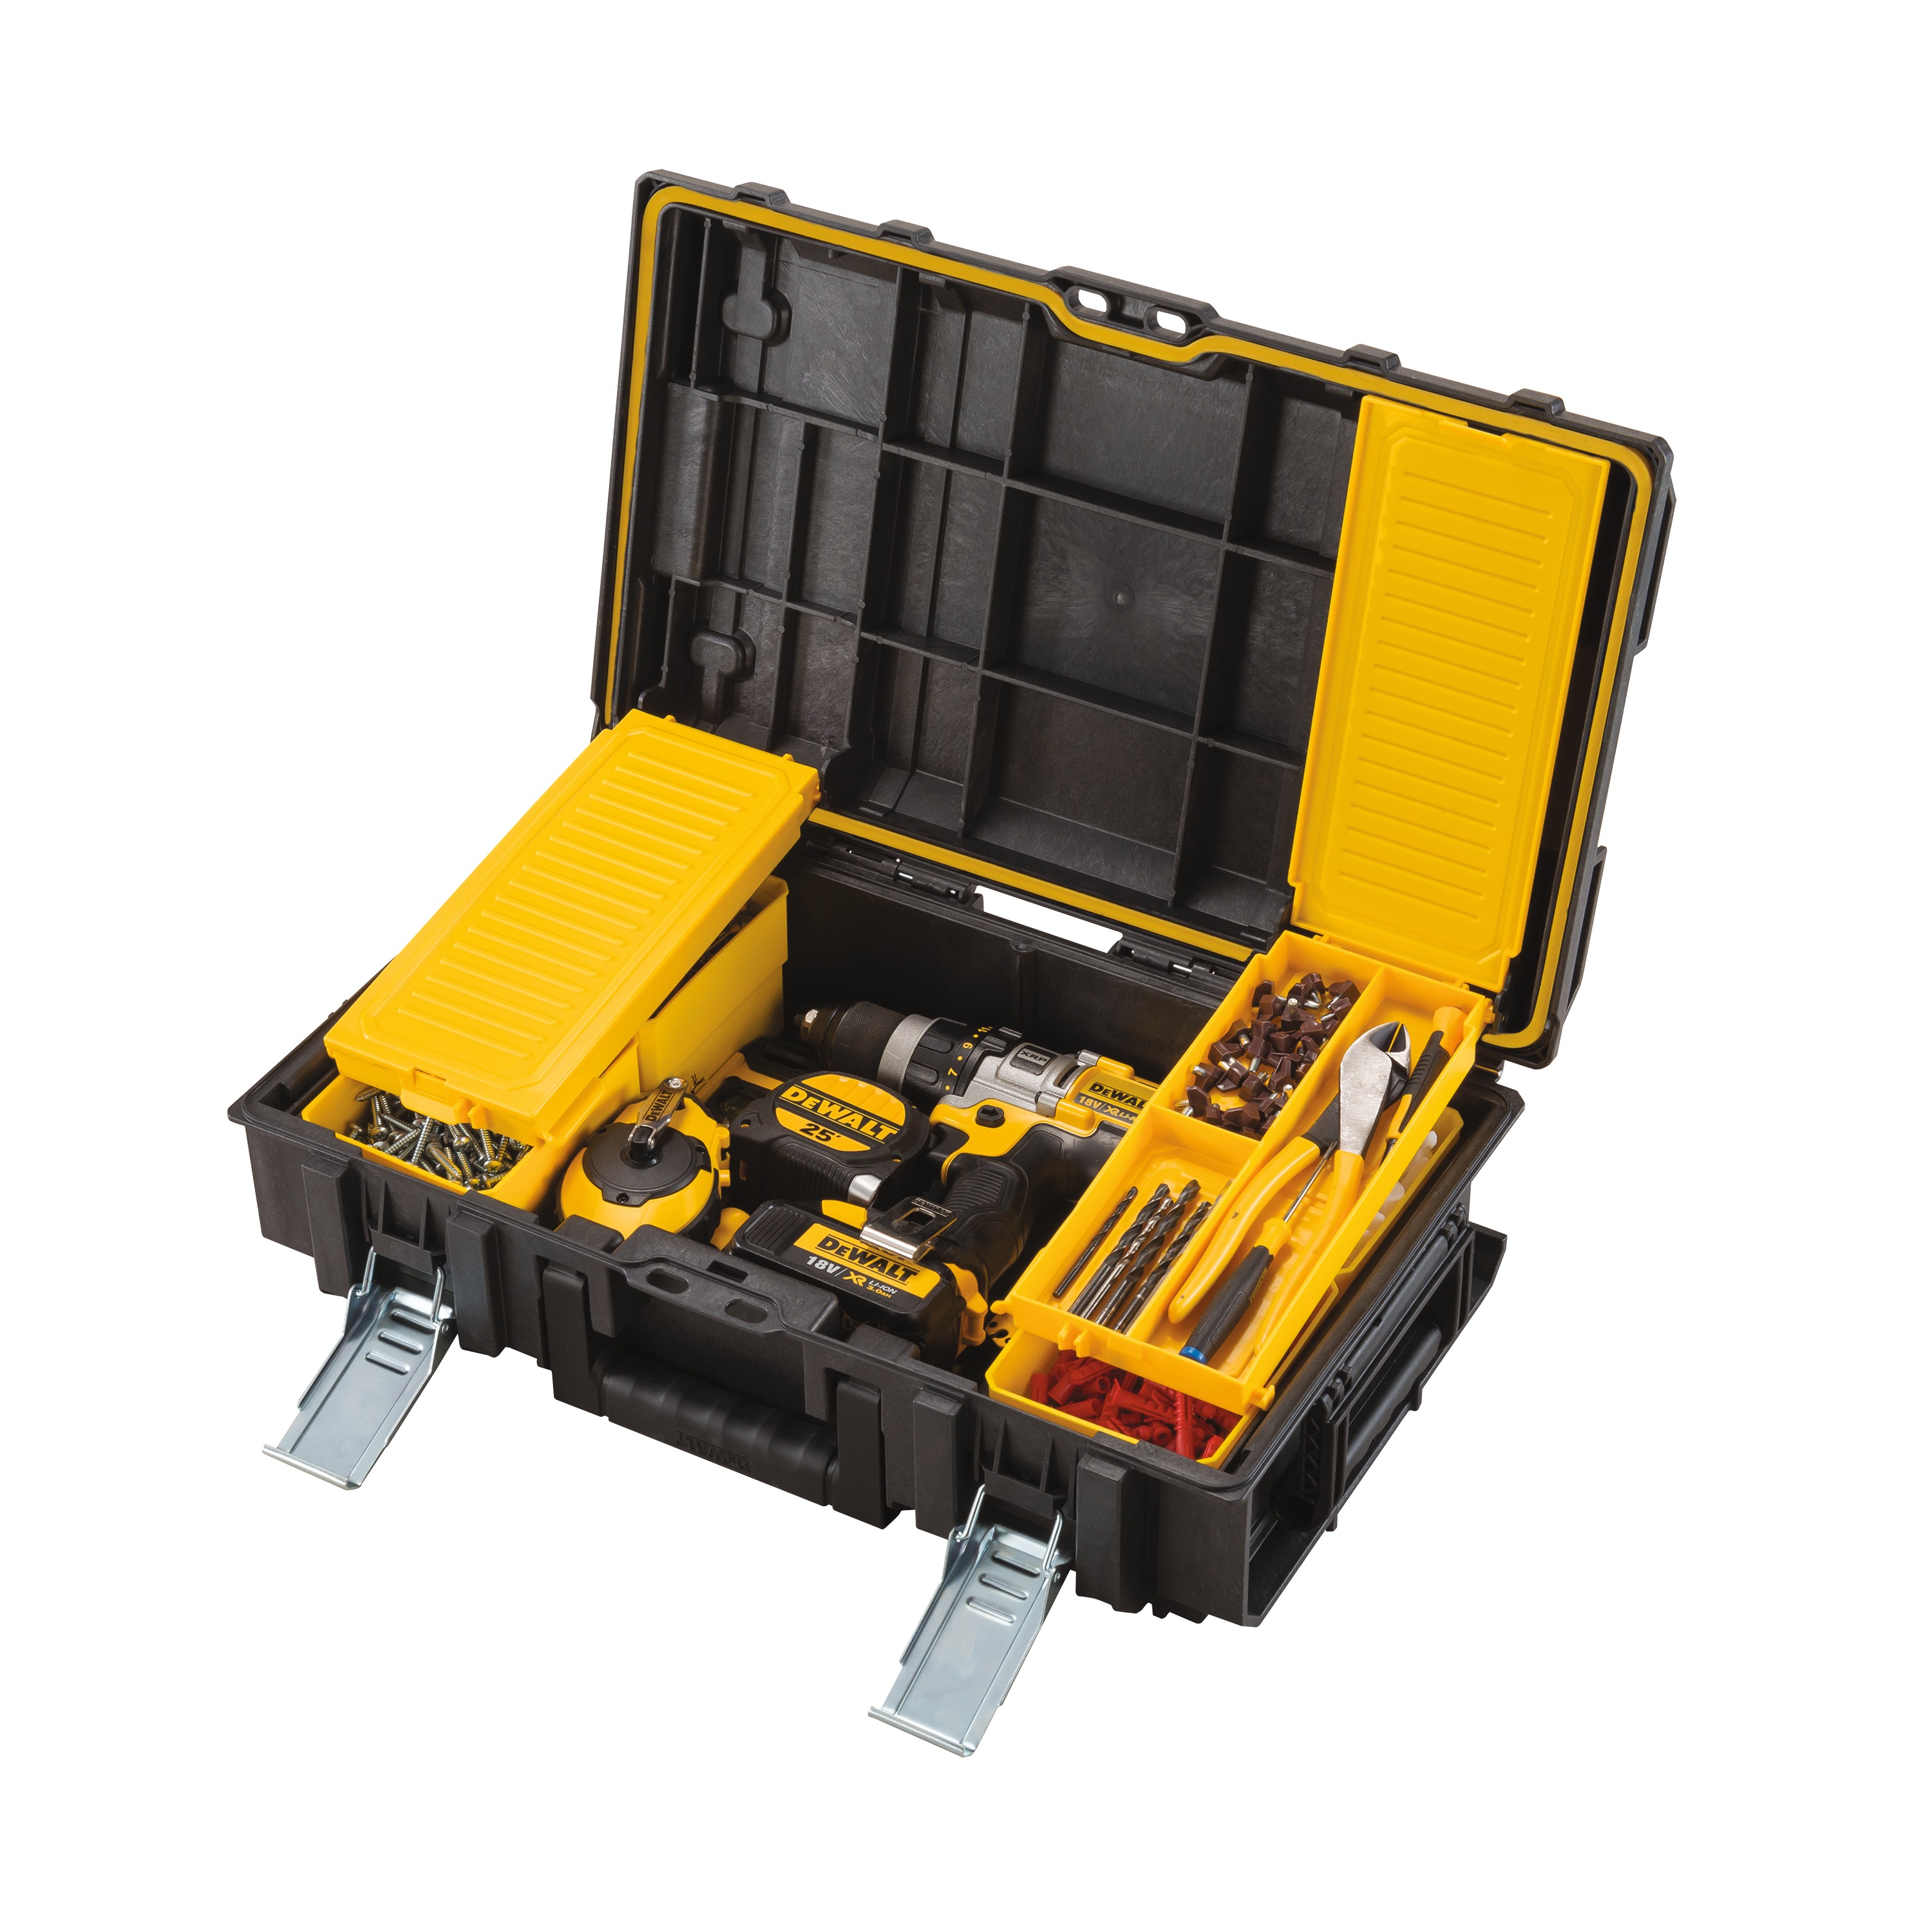 tough system DS130 holding multiple tools with lid open.